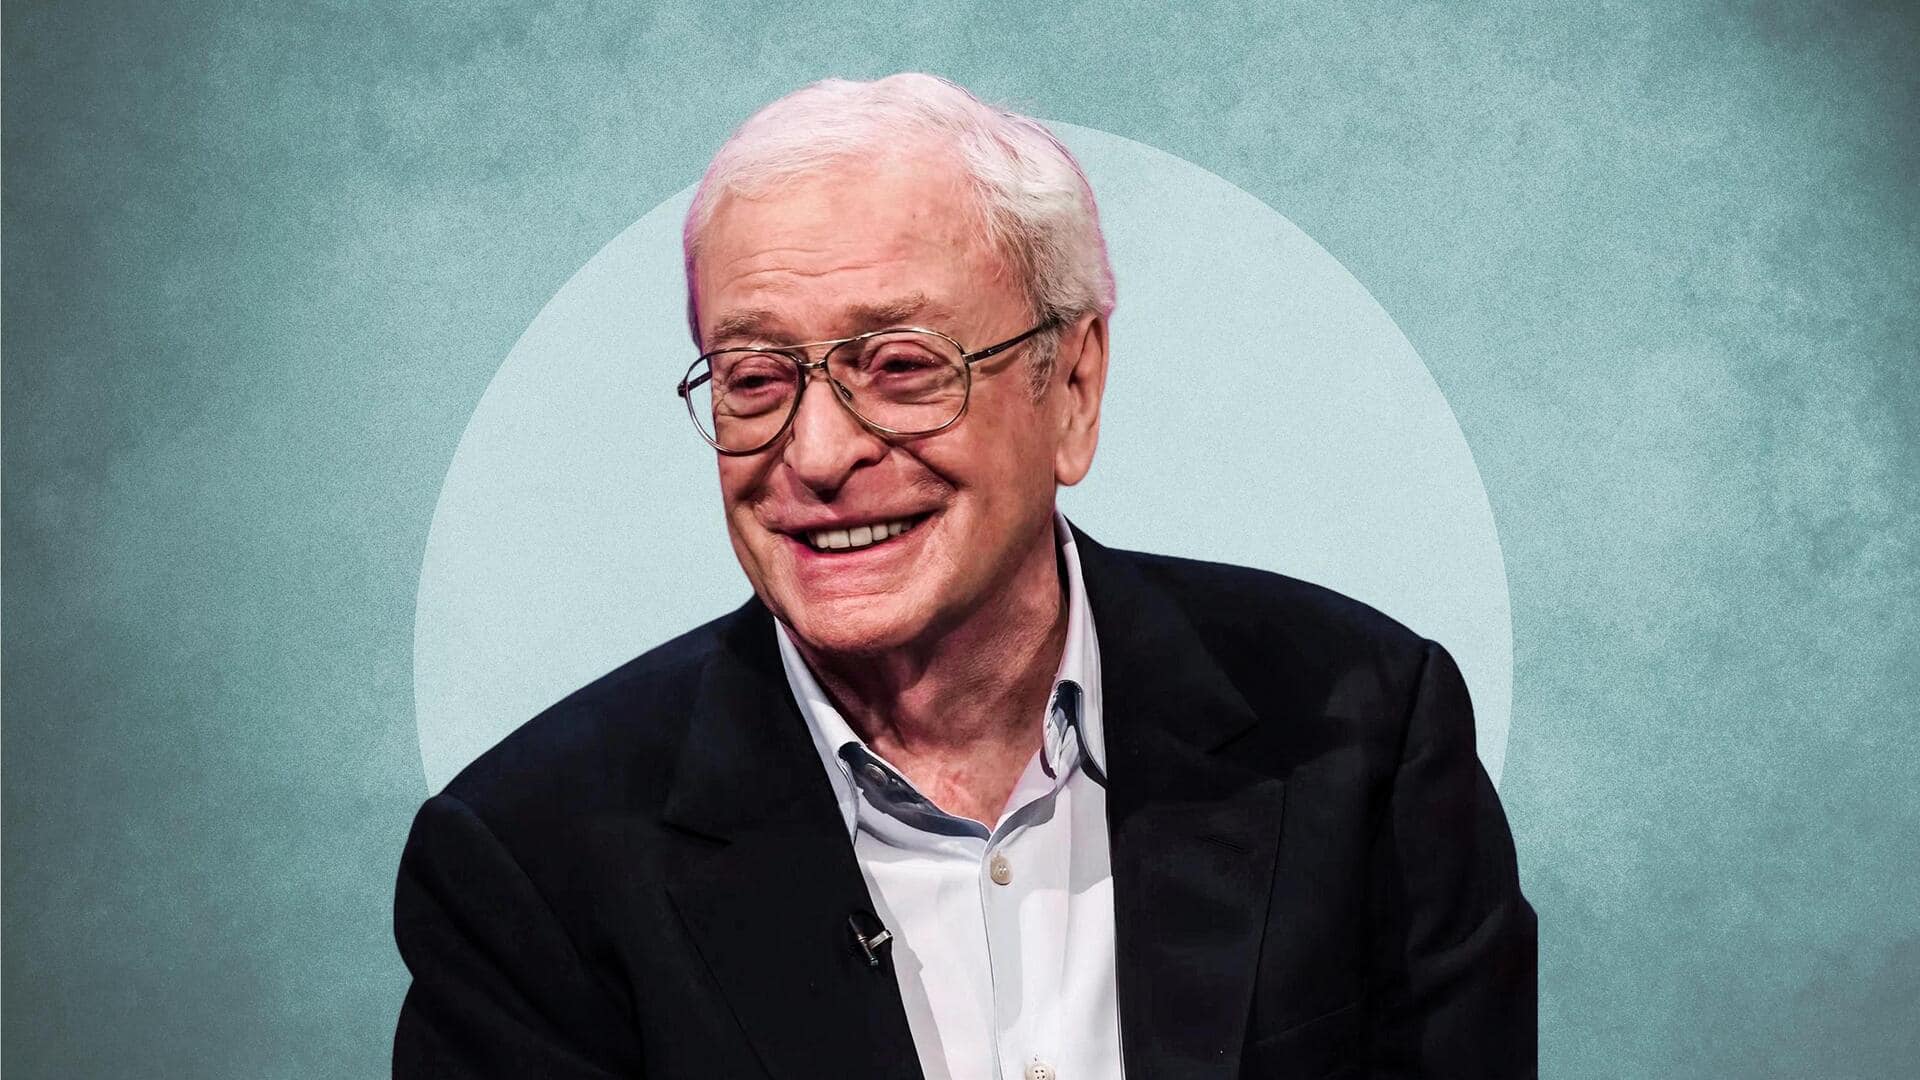 A look at Michael Caine's best performances